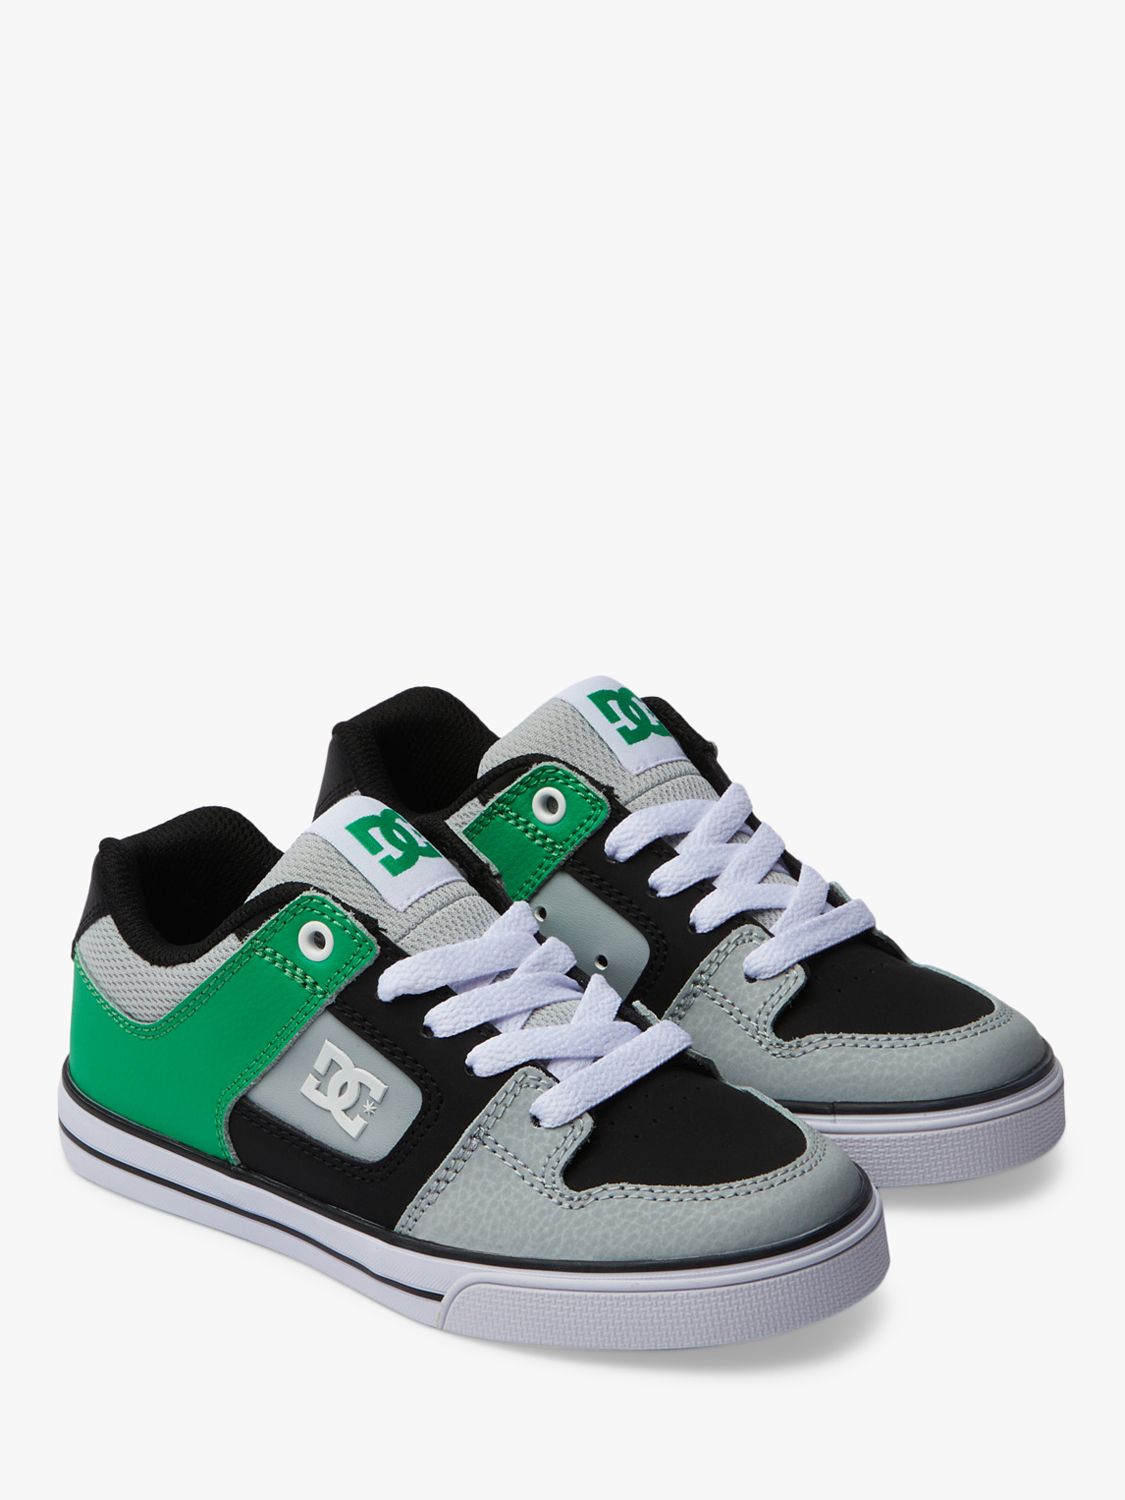 DC Shoes Kids' Pure Leather Lace Up Trainers, Black/Green, 1